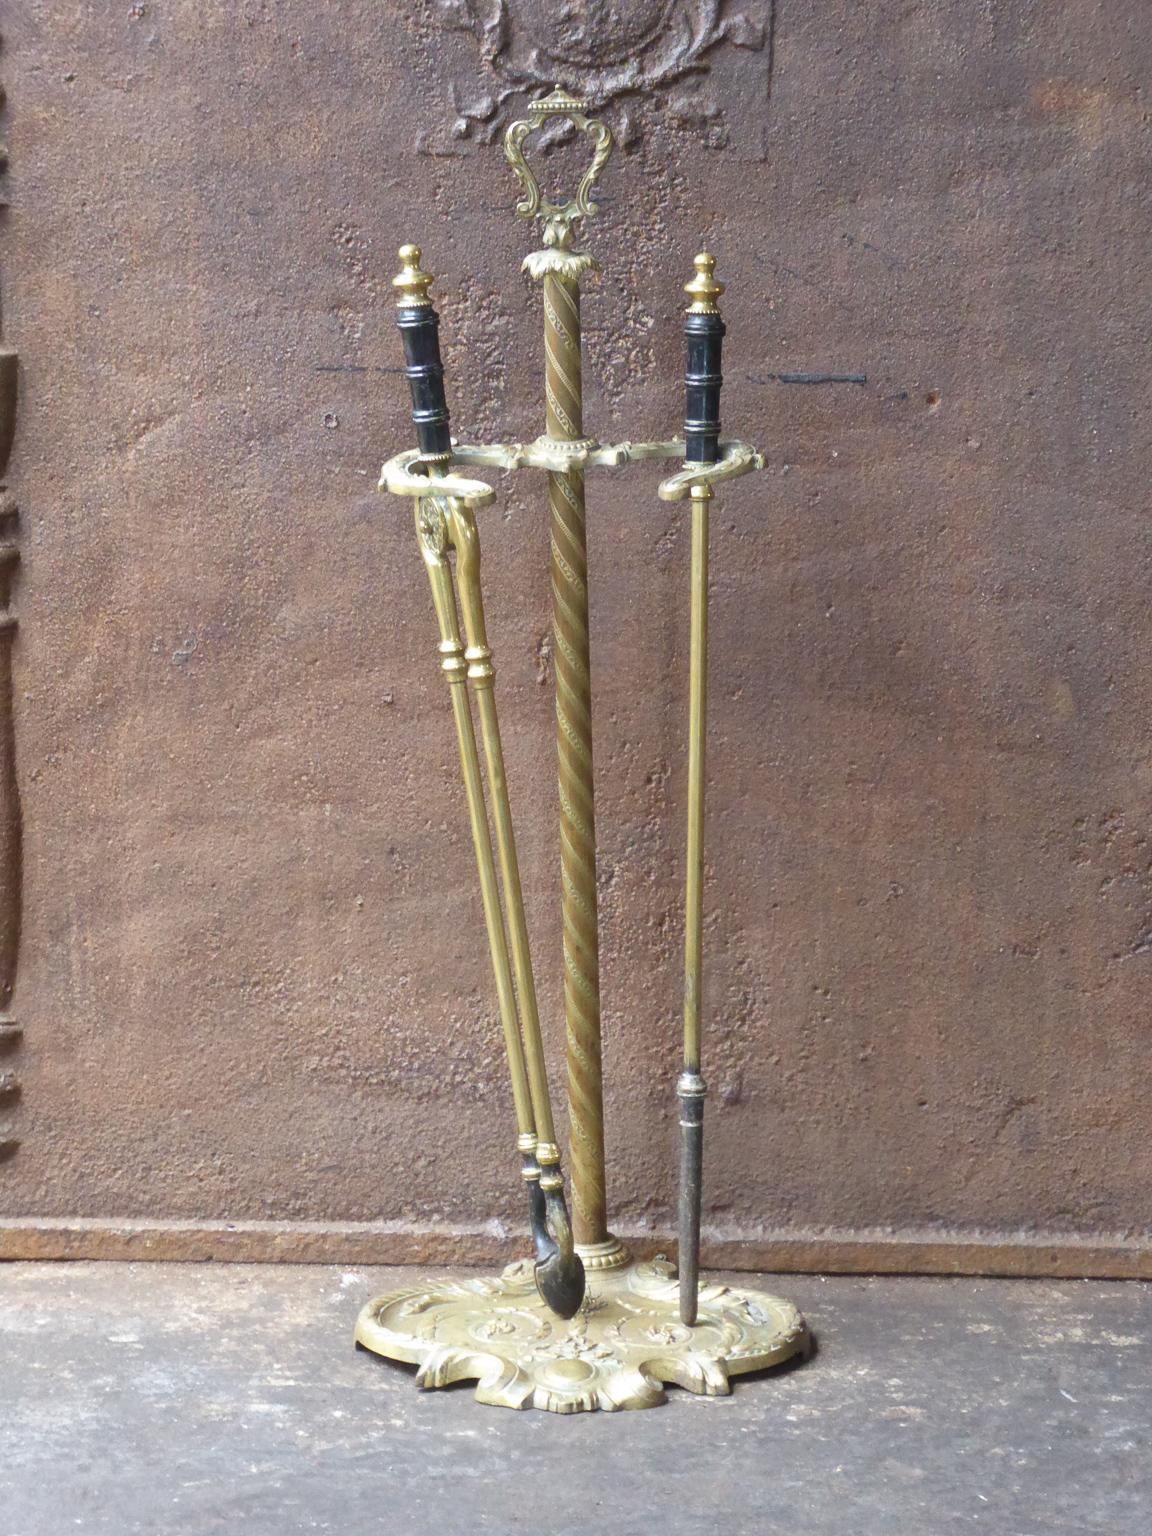 19th century English Victorian fire tool set. The set is made of wrought iron and brass. The set is in a good condition and is fully functional.